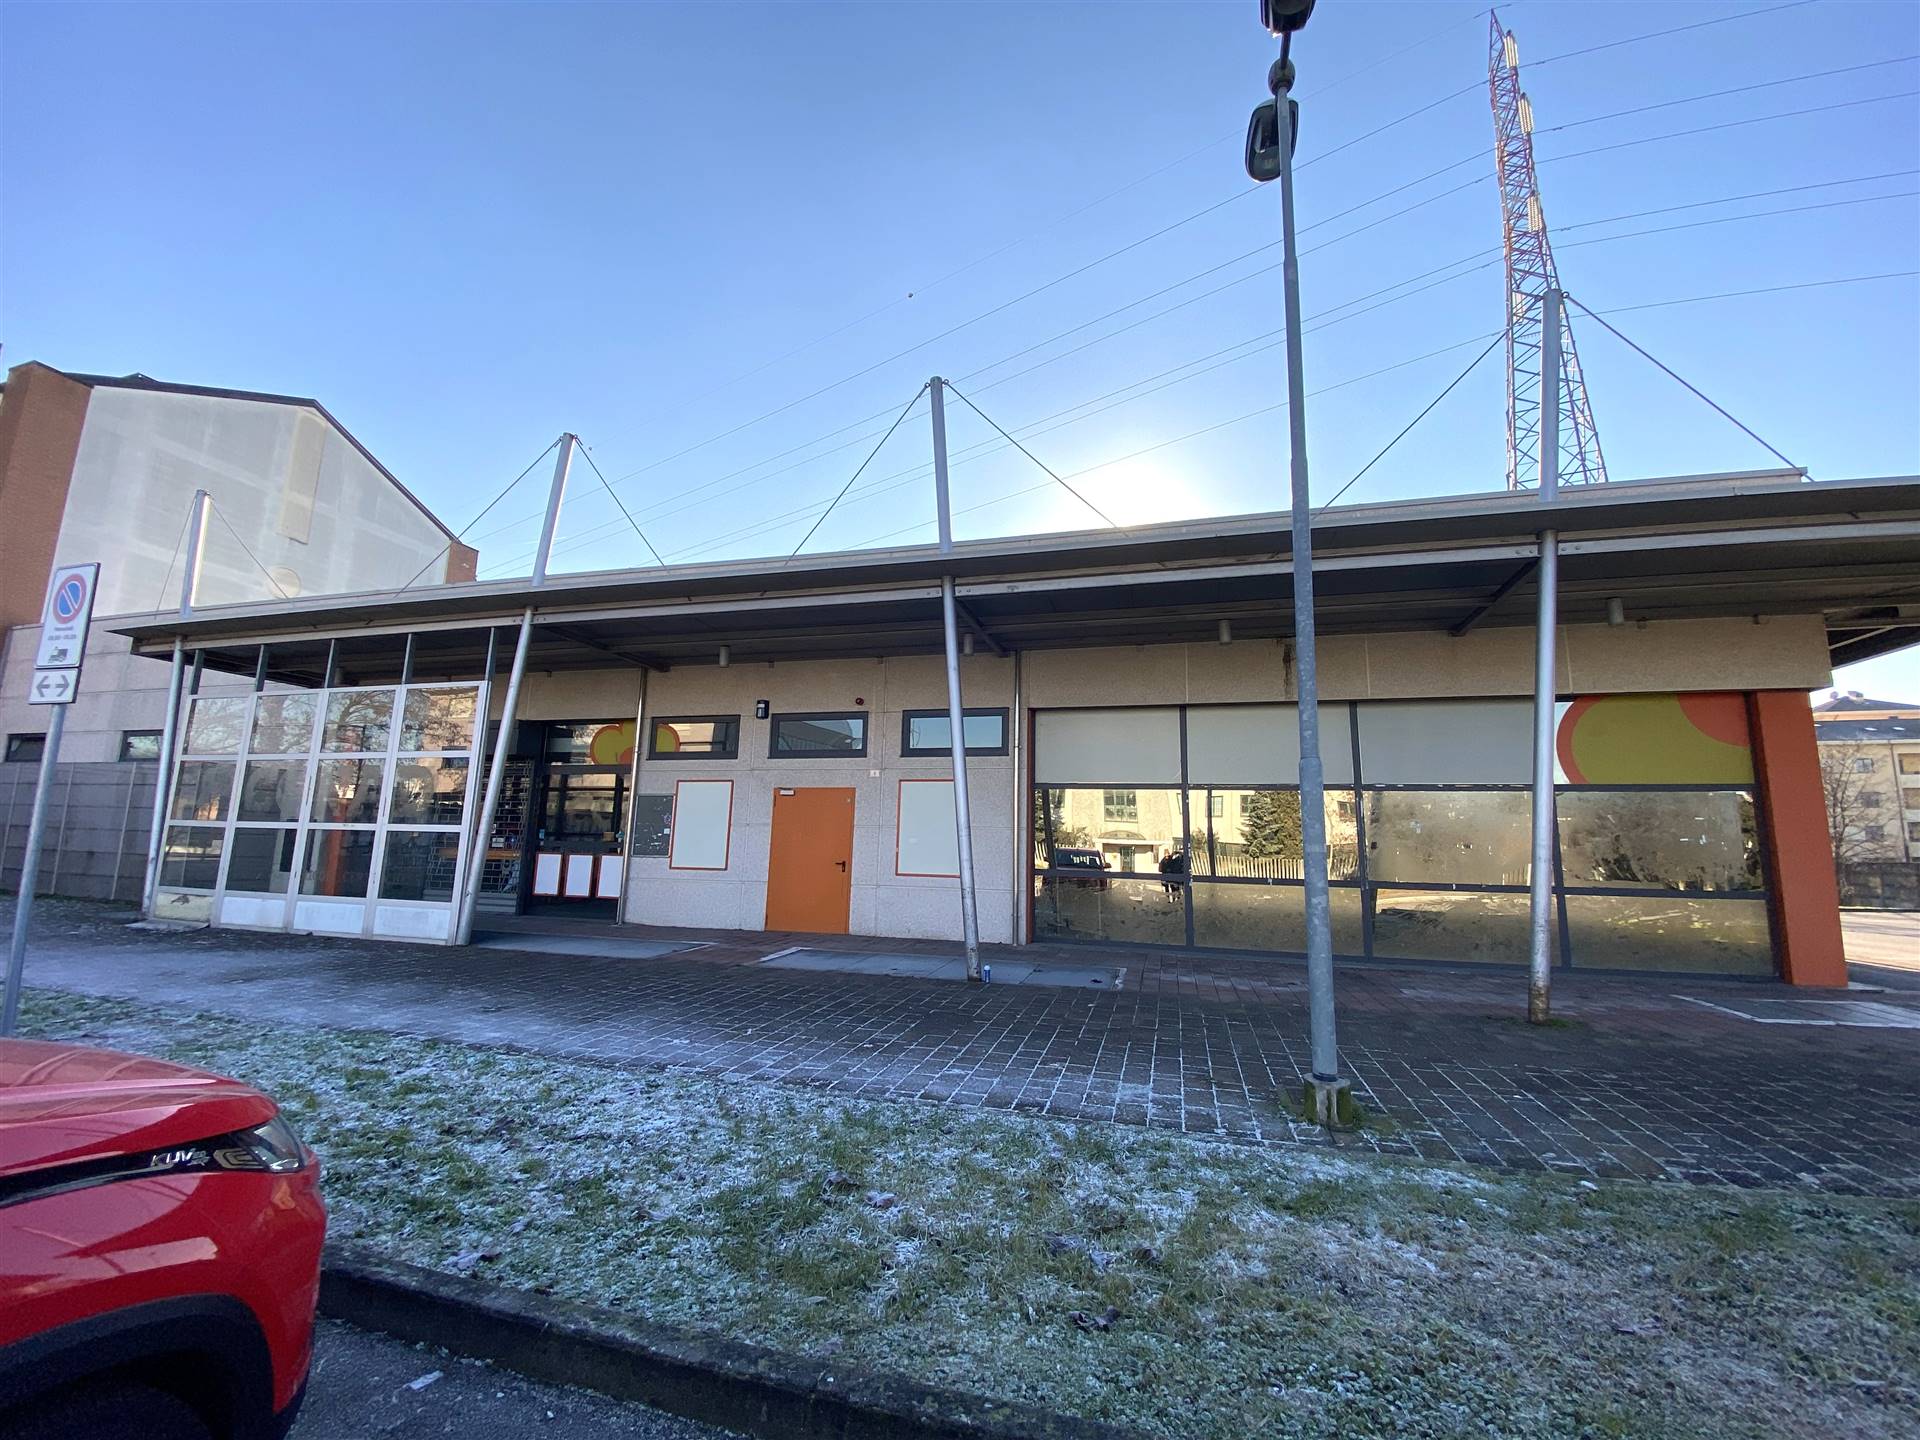 CERNUSCO SUL NAVIGLIO, Shop for rent, Good condition, Heating Individual heating system, Energetic class: D, Epi: 535 kwh/m3 year, placed at Ground, composed by: , 2 Bathrooms, Elevator, Price: € 12,